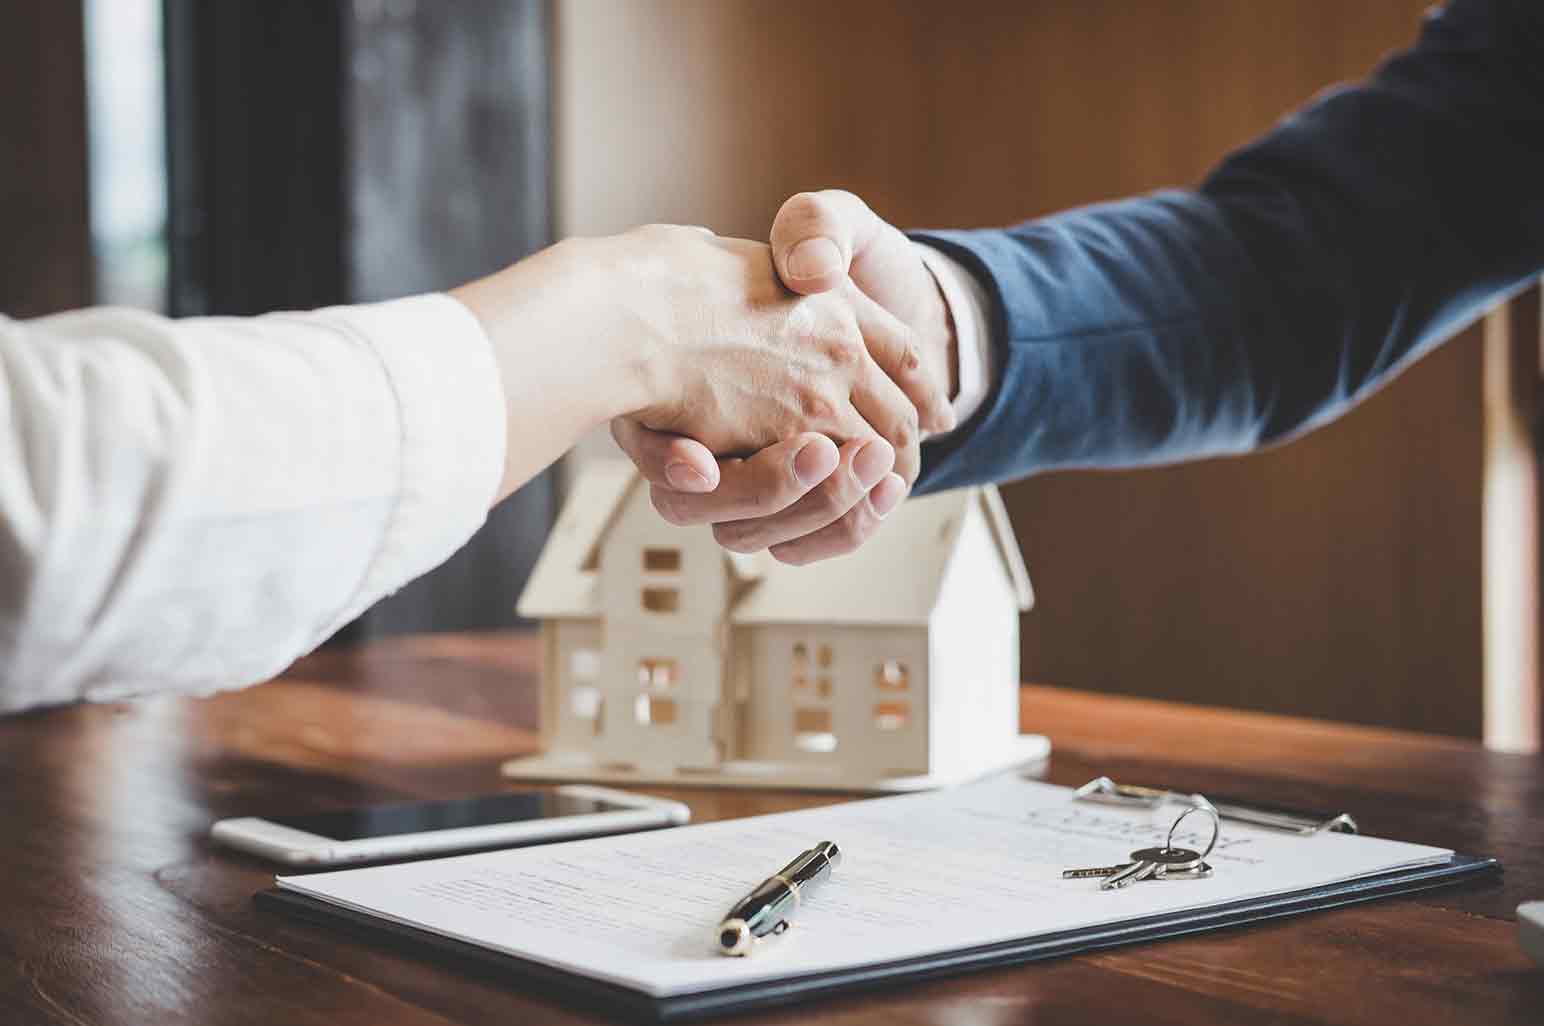 How to take out a real estate loan